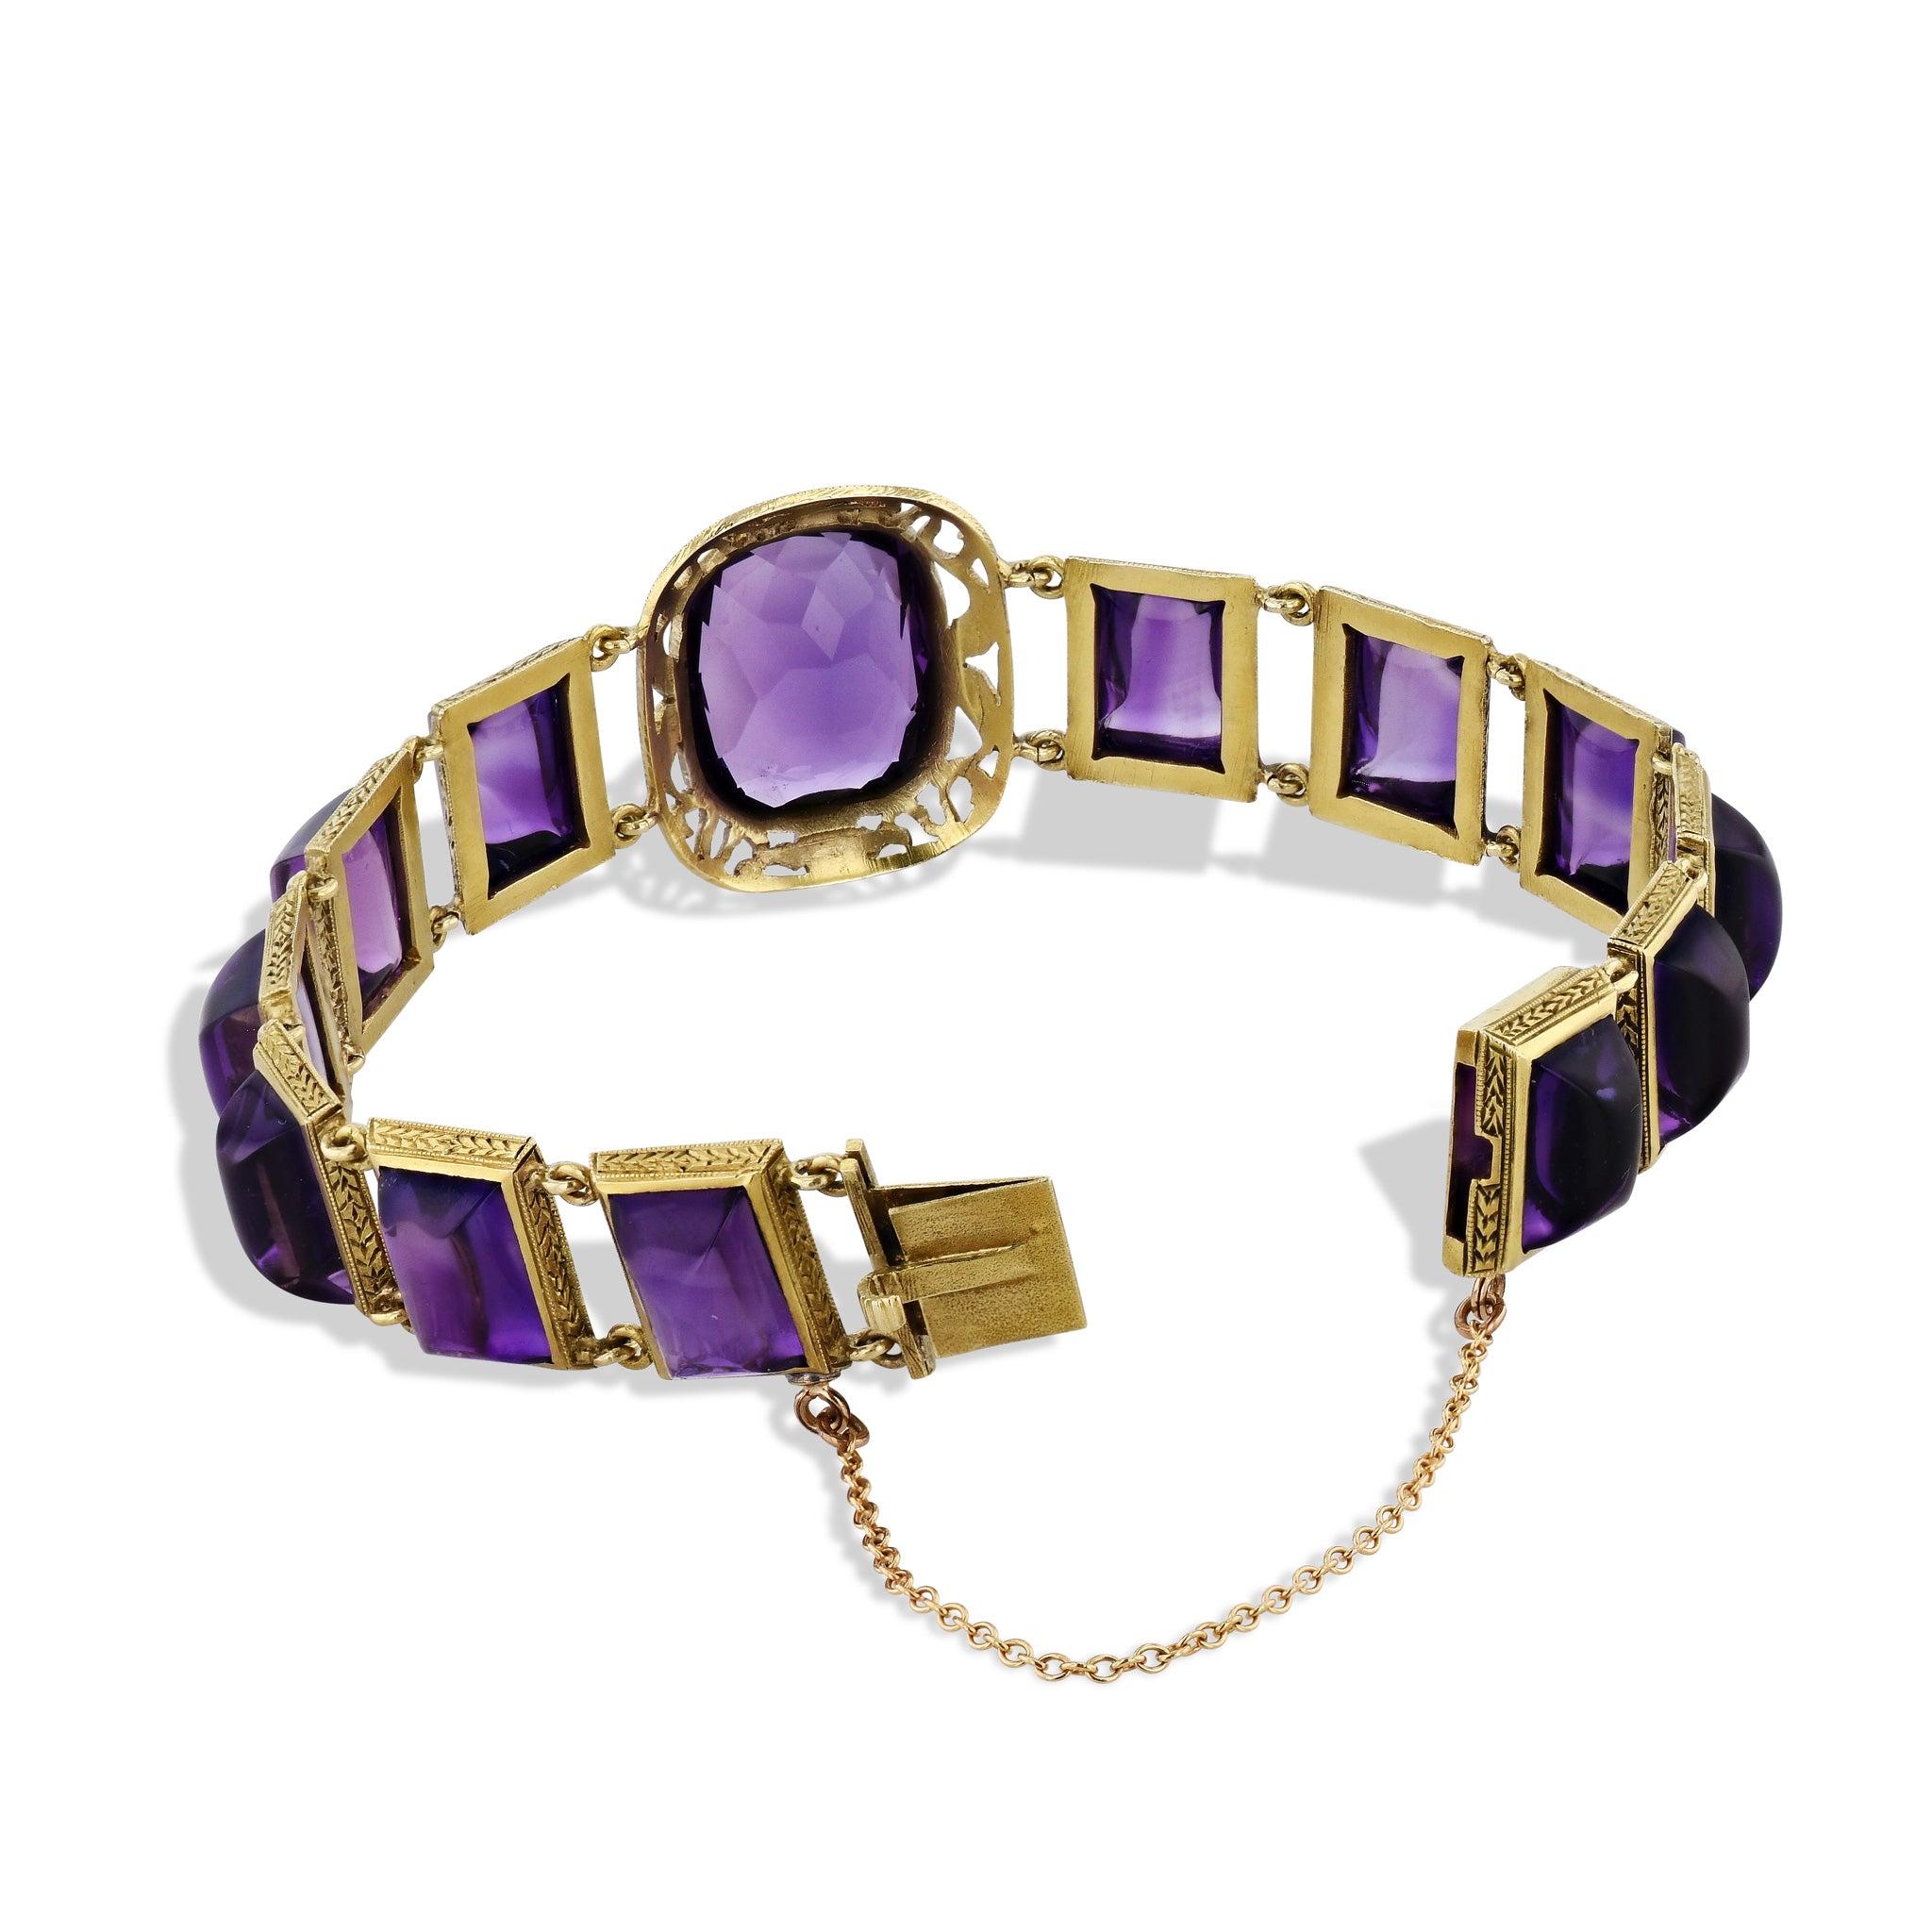 The Hugh Connolly & Son Amethyst Yellow Gold Estate Bracelet is an exquisite piece of timeless beauty and luxury. This 14kt. Yellow Gold bracelet features a stunning antique cushion cut natural Amethyst center, surrounded by 12 dazzling Sugar Loaf